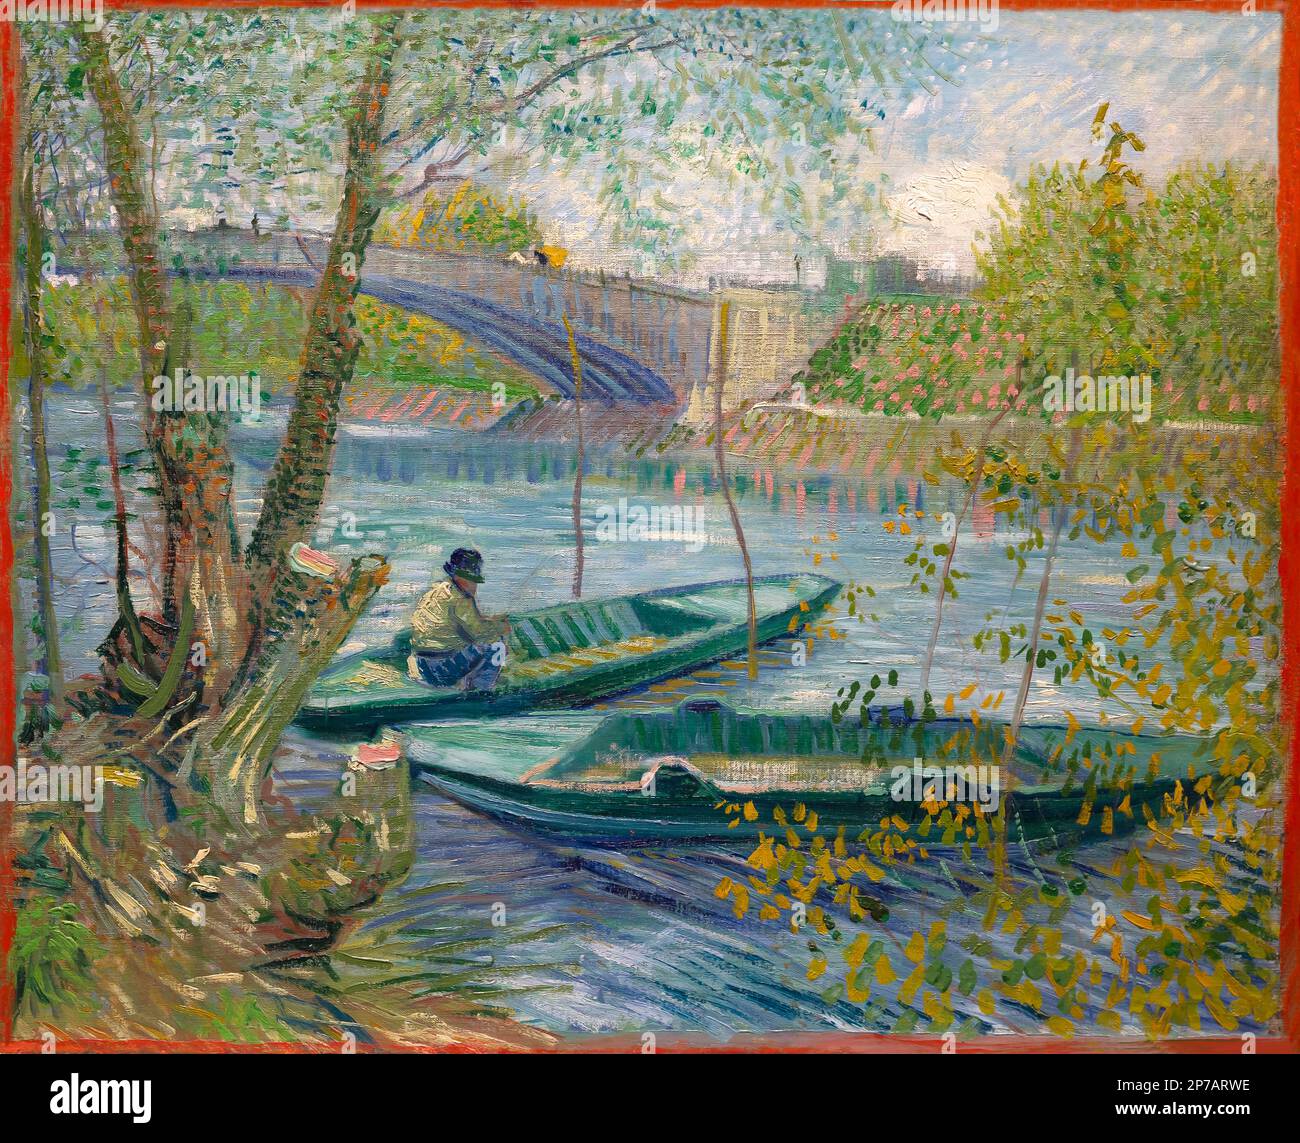 Fishing in Spring, the Pont de Clichy Asnieres, Vincent van Gogh, 1887, Art Institute of Chicago, Chicago, Illinois, USA, North America, Stock Photo